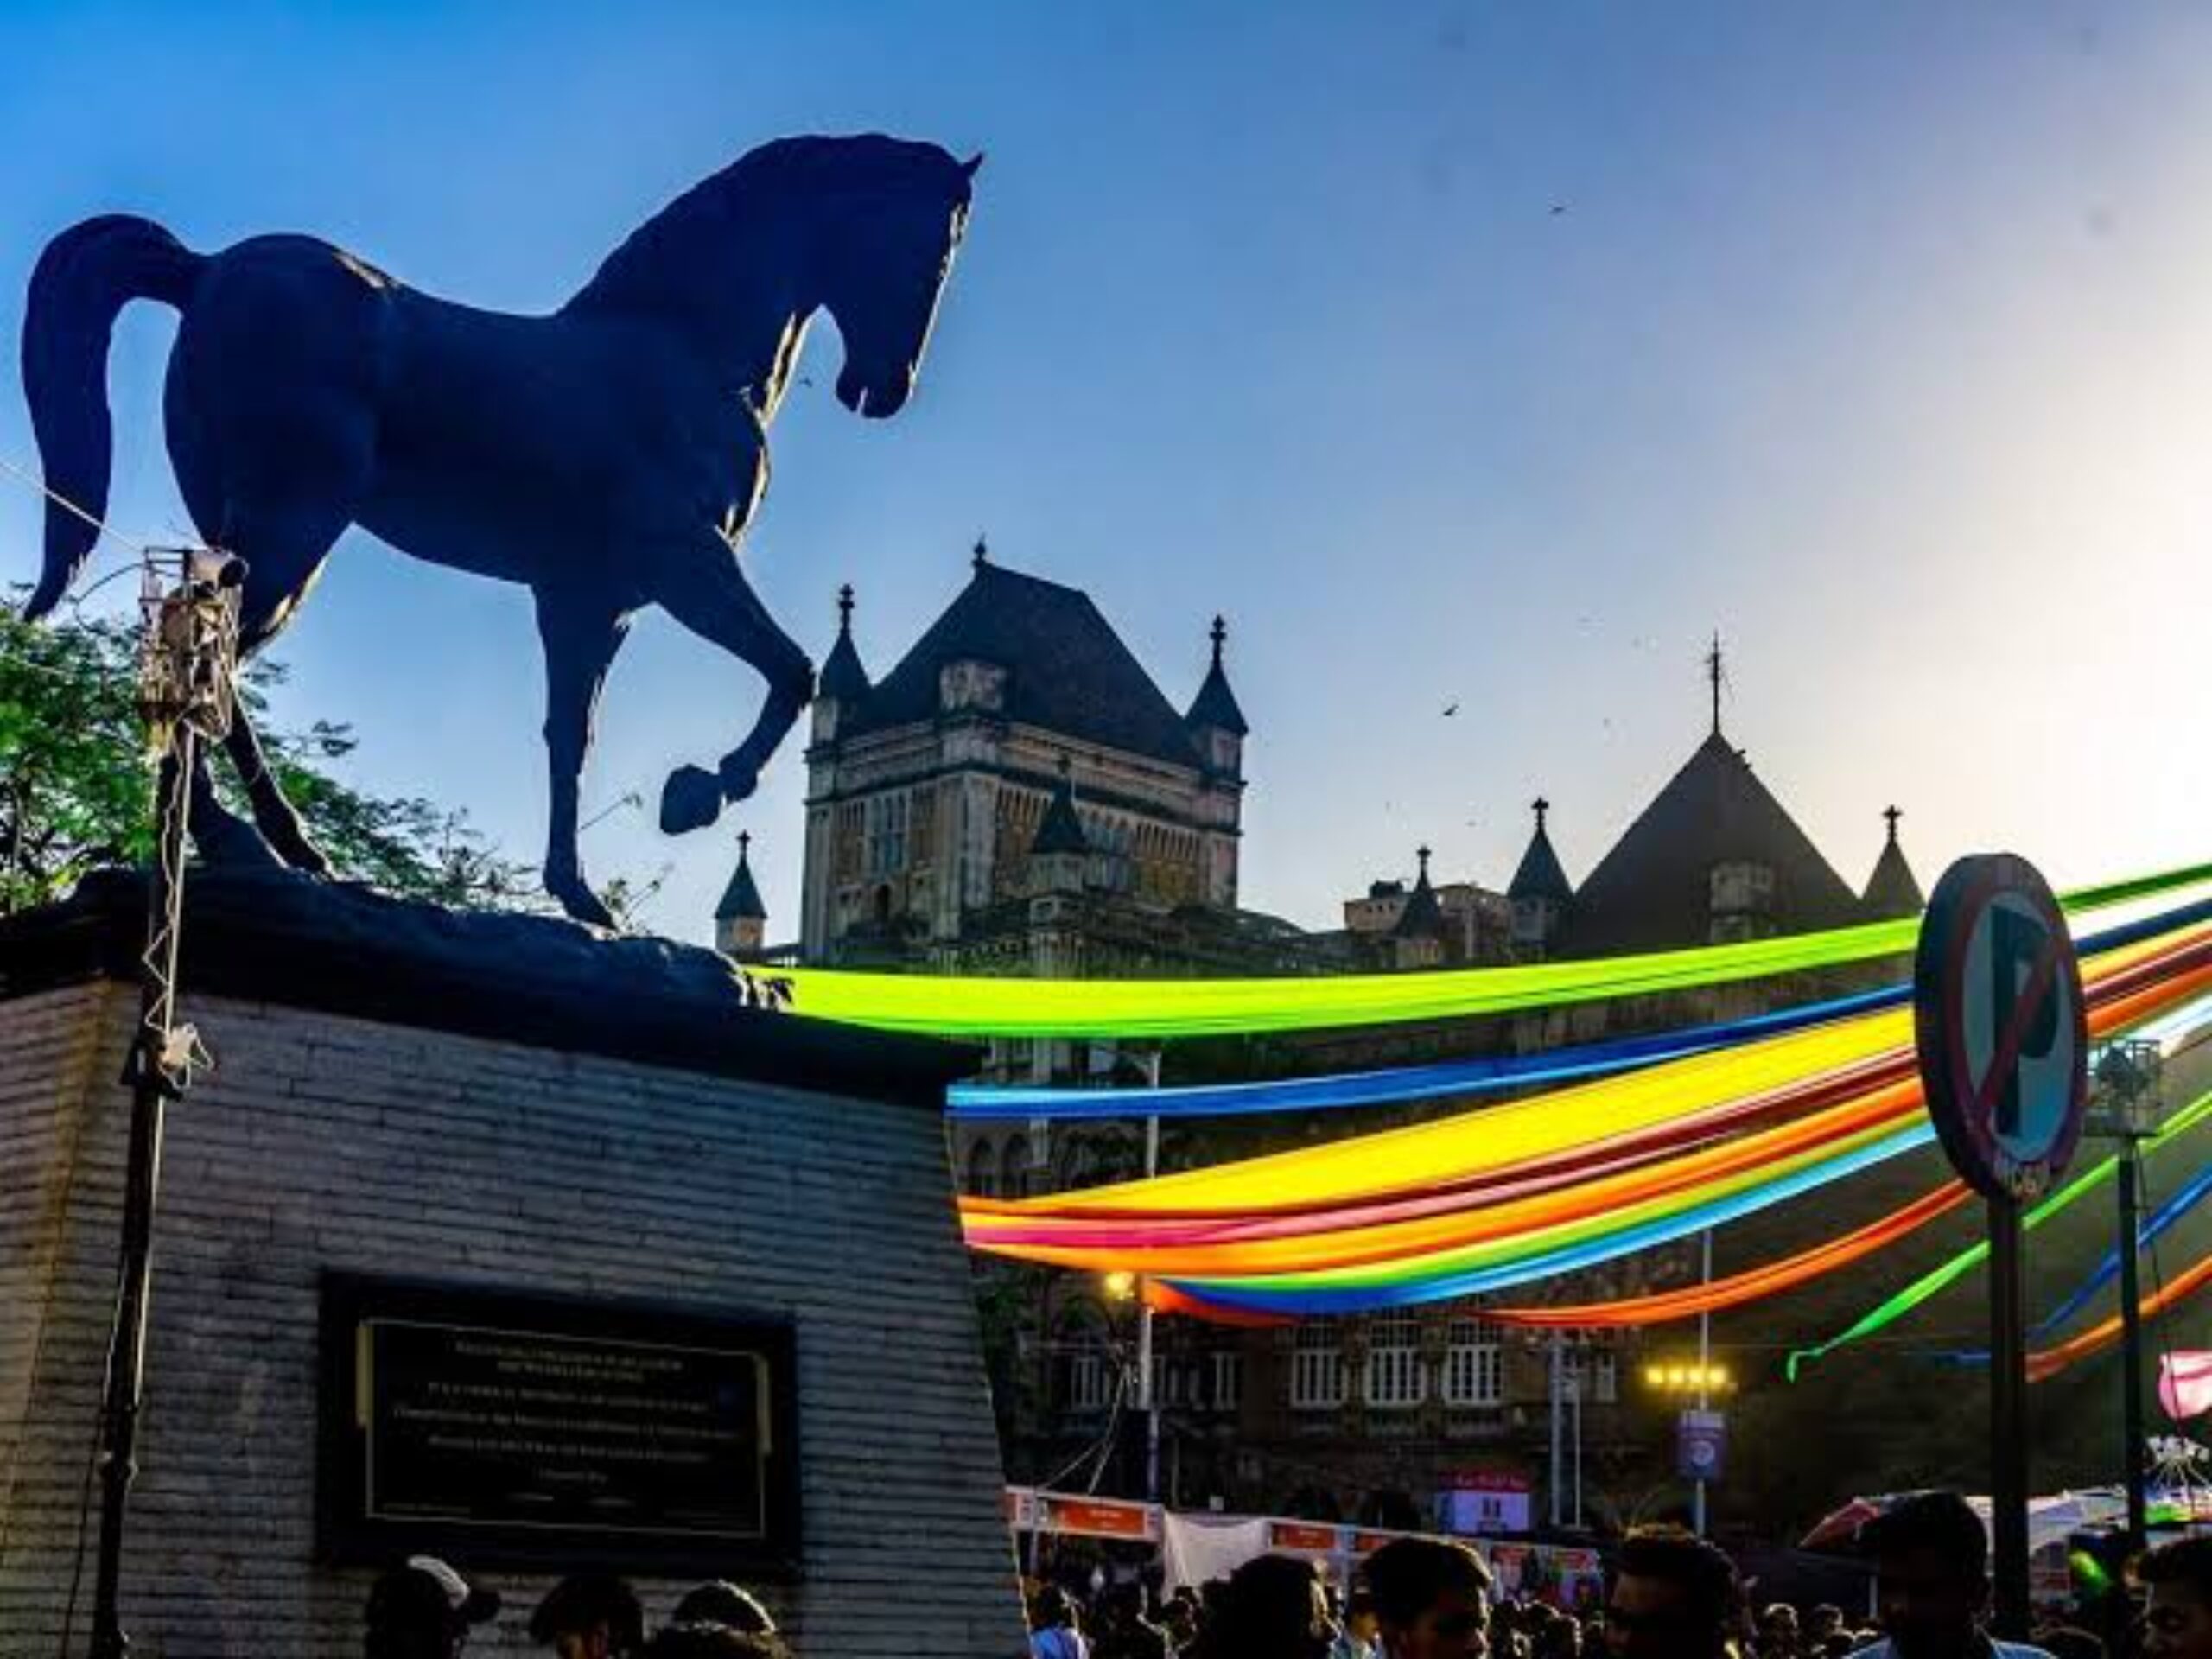 The Kala Ghoda festival takes place in  neighborhood of Mumbai, a short 10 minute drive away from the budget hotels.